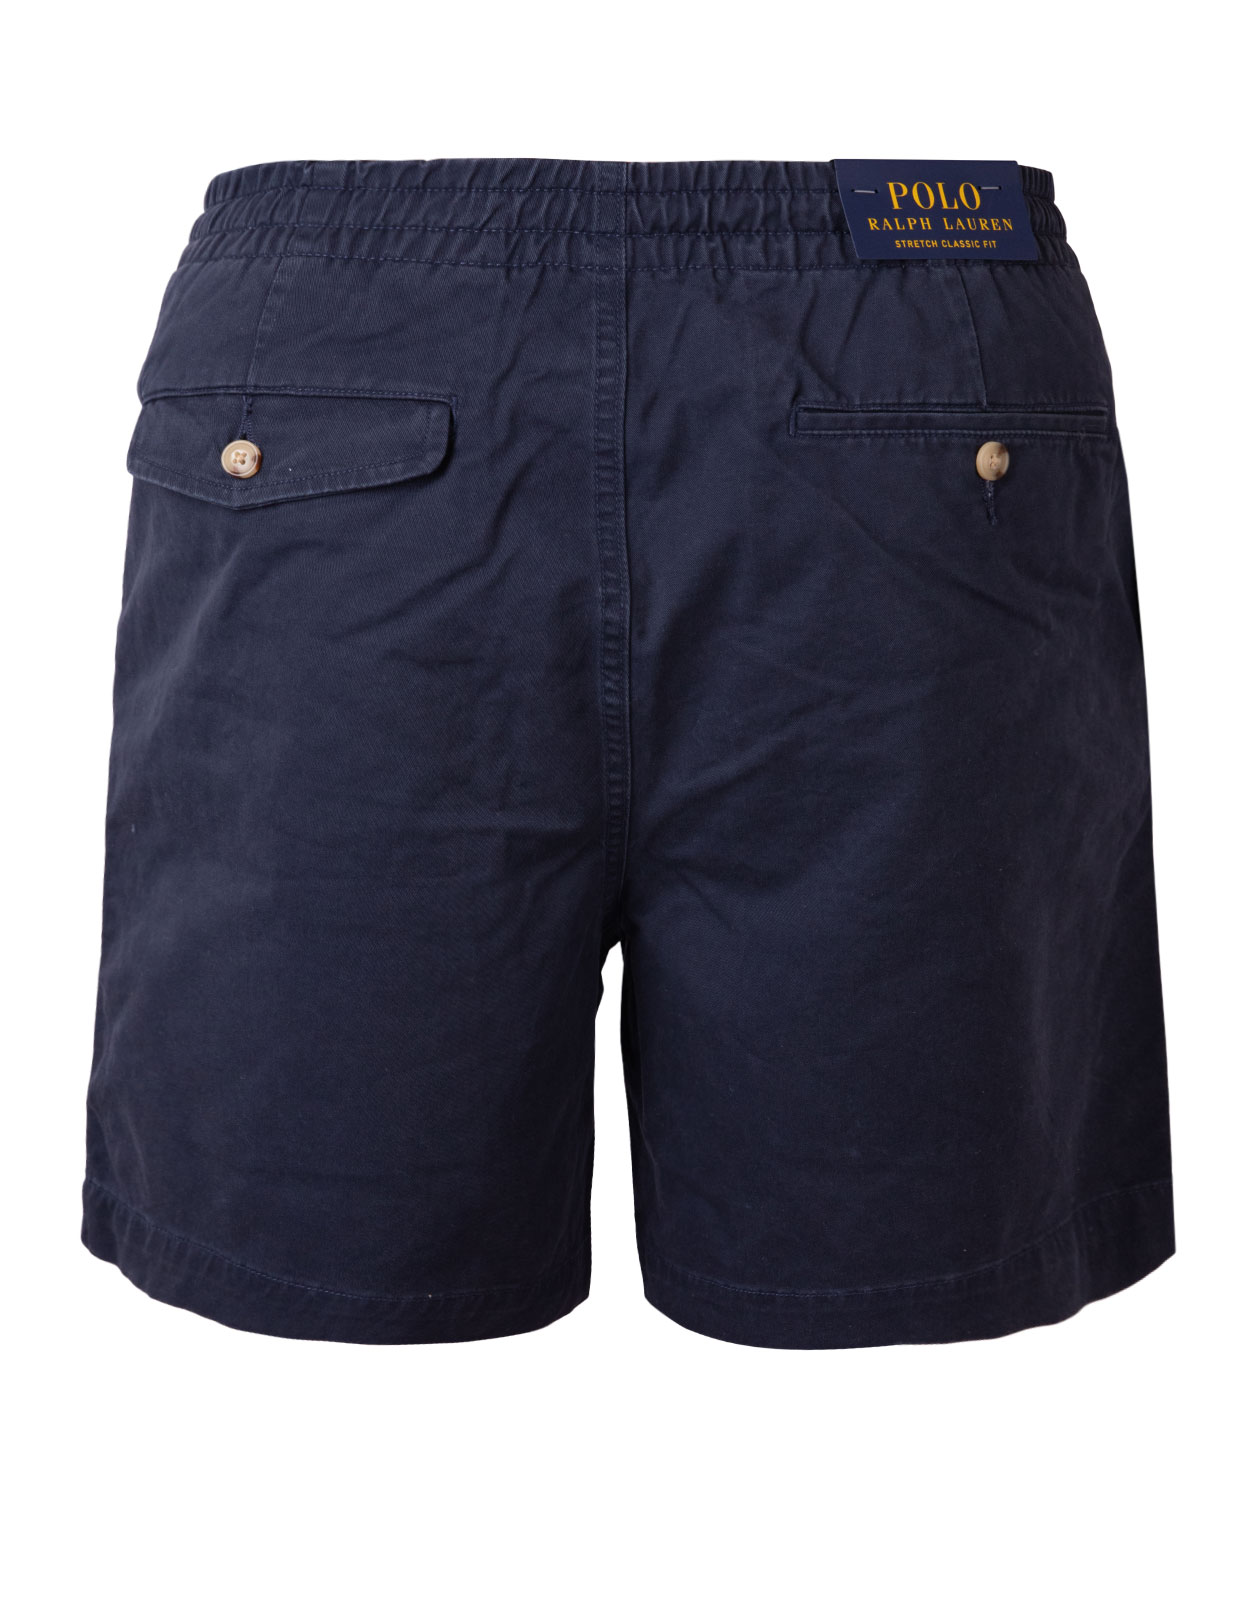 Classic Fit Polo Prepster Shorts Nautical Ink